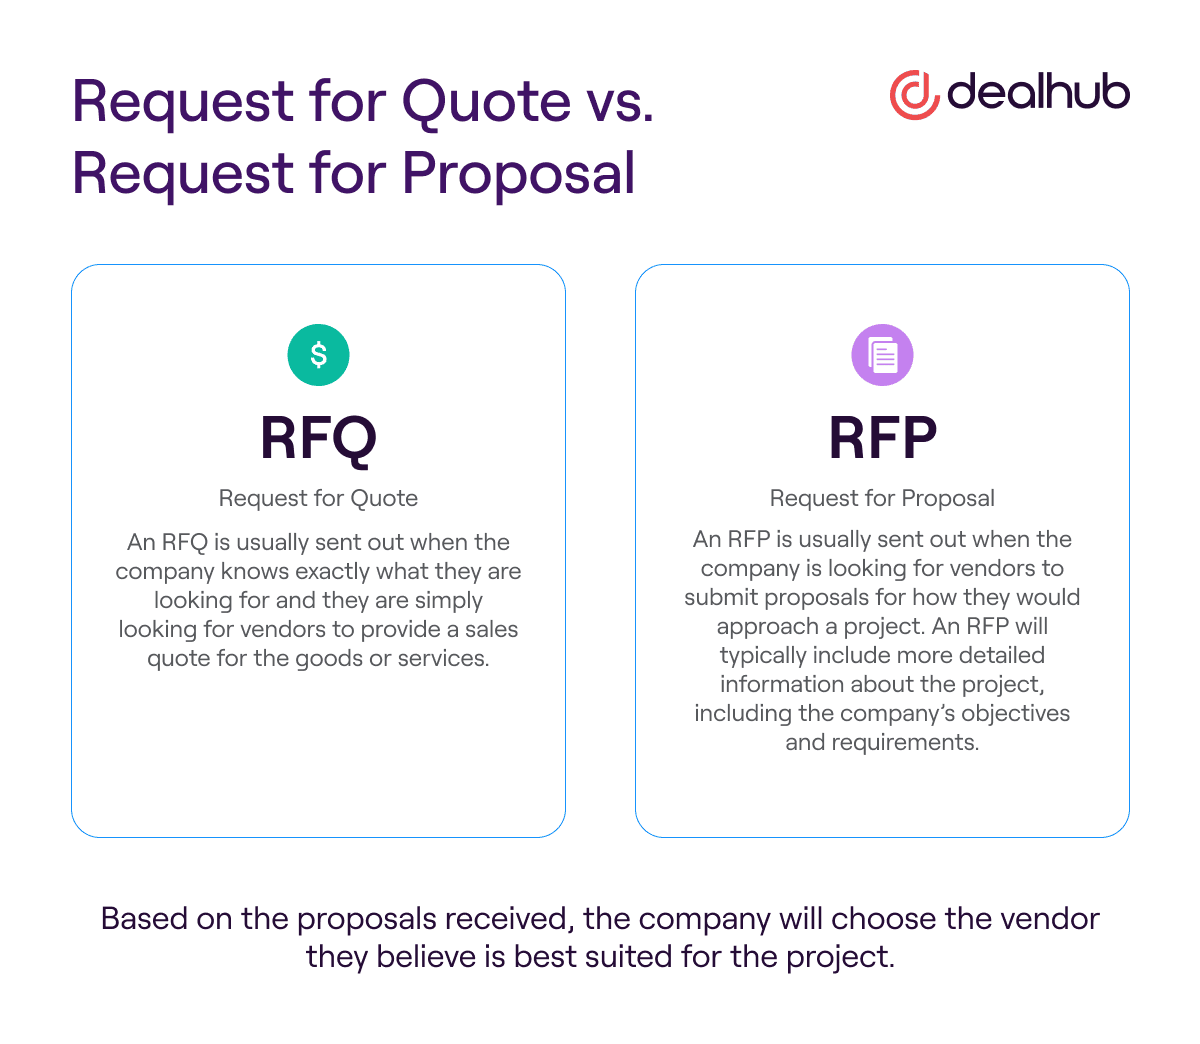 Request for Quote vs. Request for Proposal